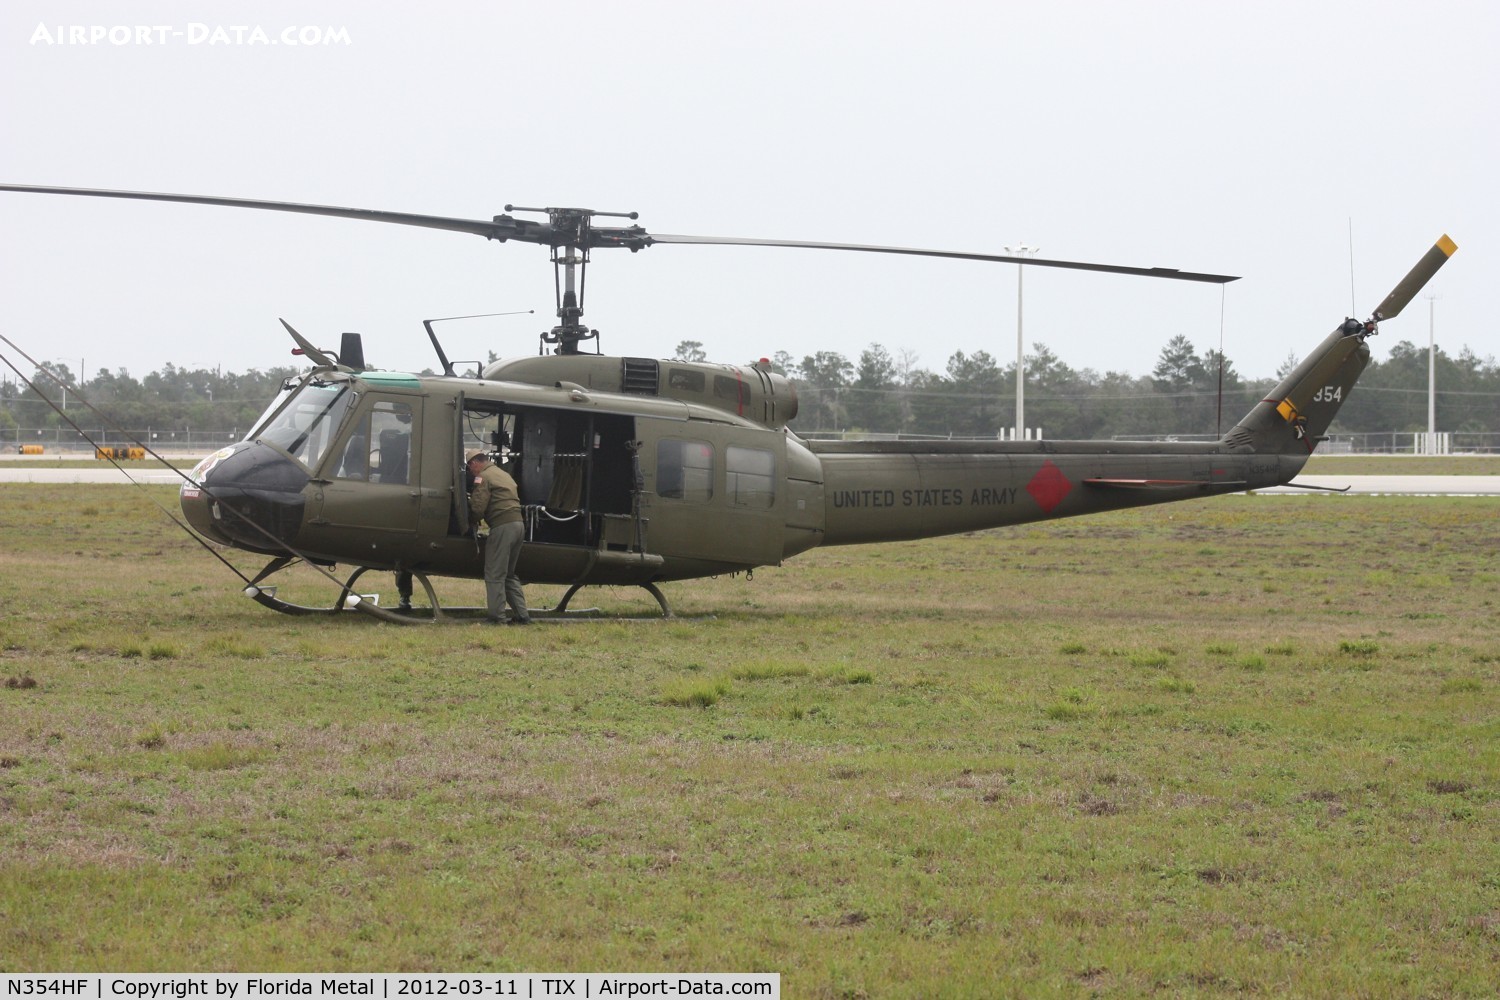 N354HF, 1964 Bell UH-1H Iroquois C/N 69-15354, UH-1H giving rides